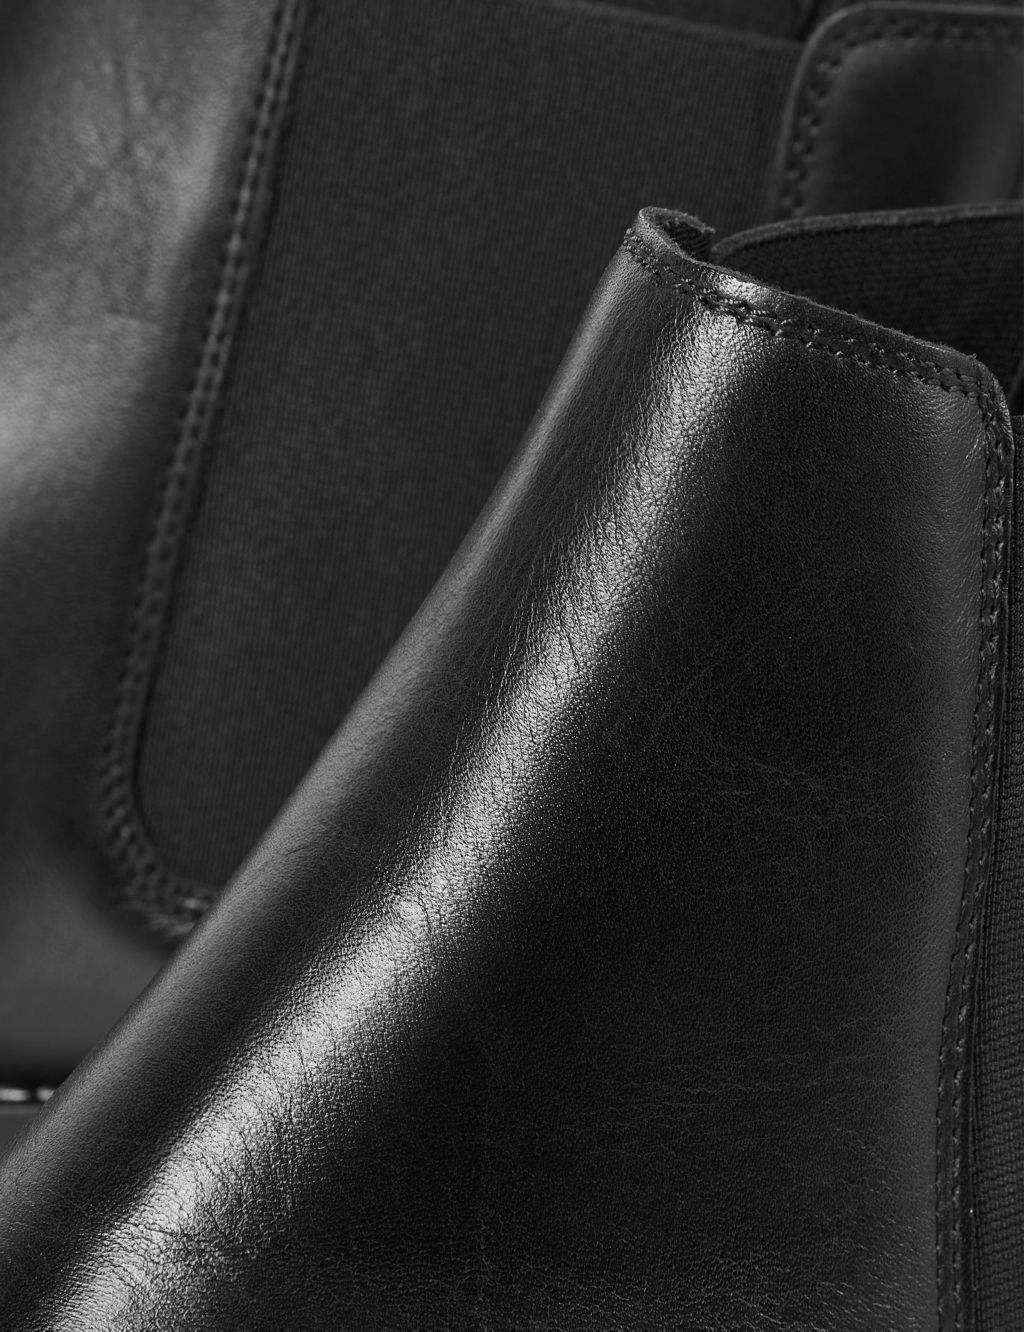 Leather Chelsea Boots image 5